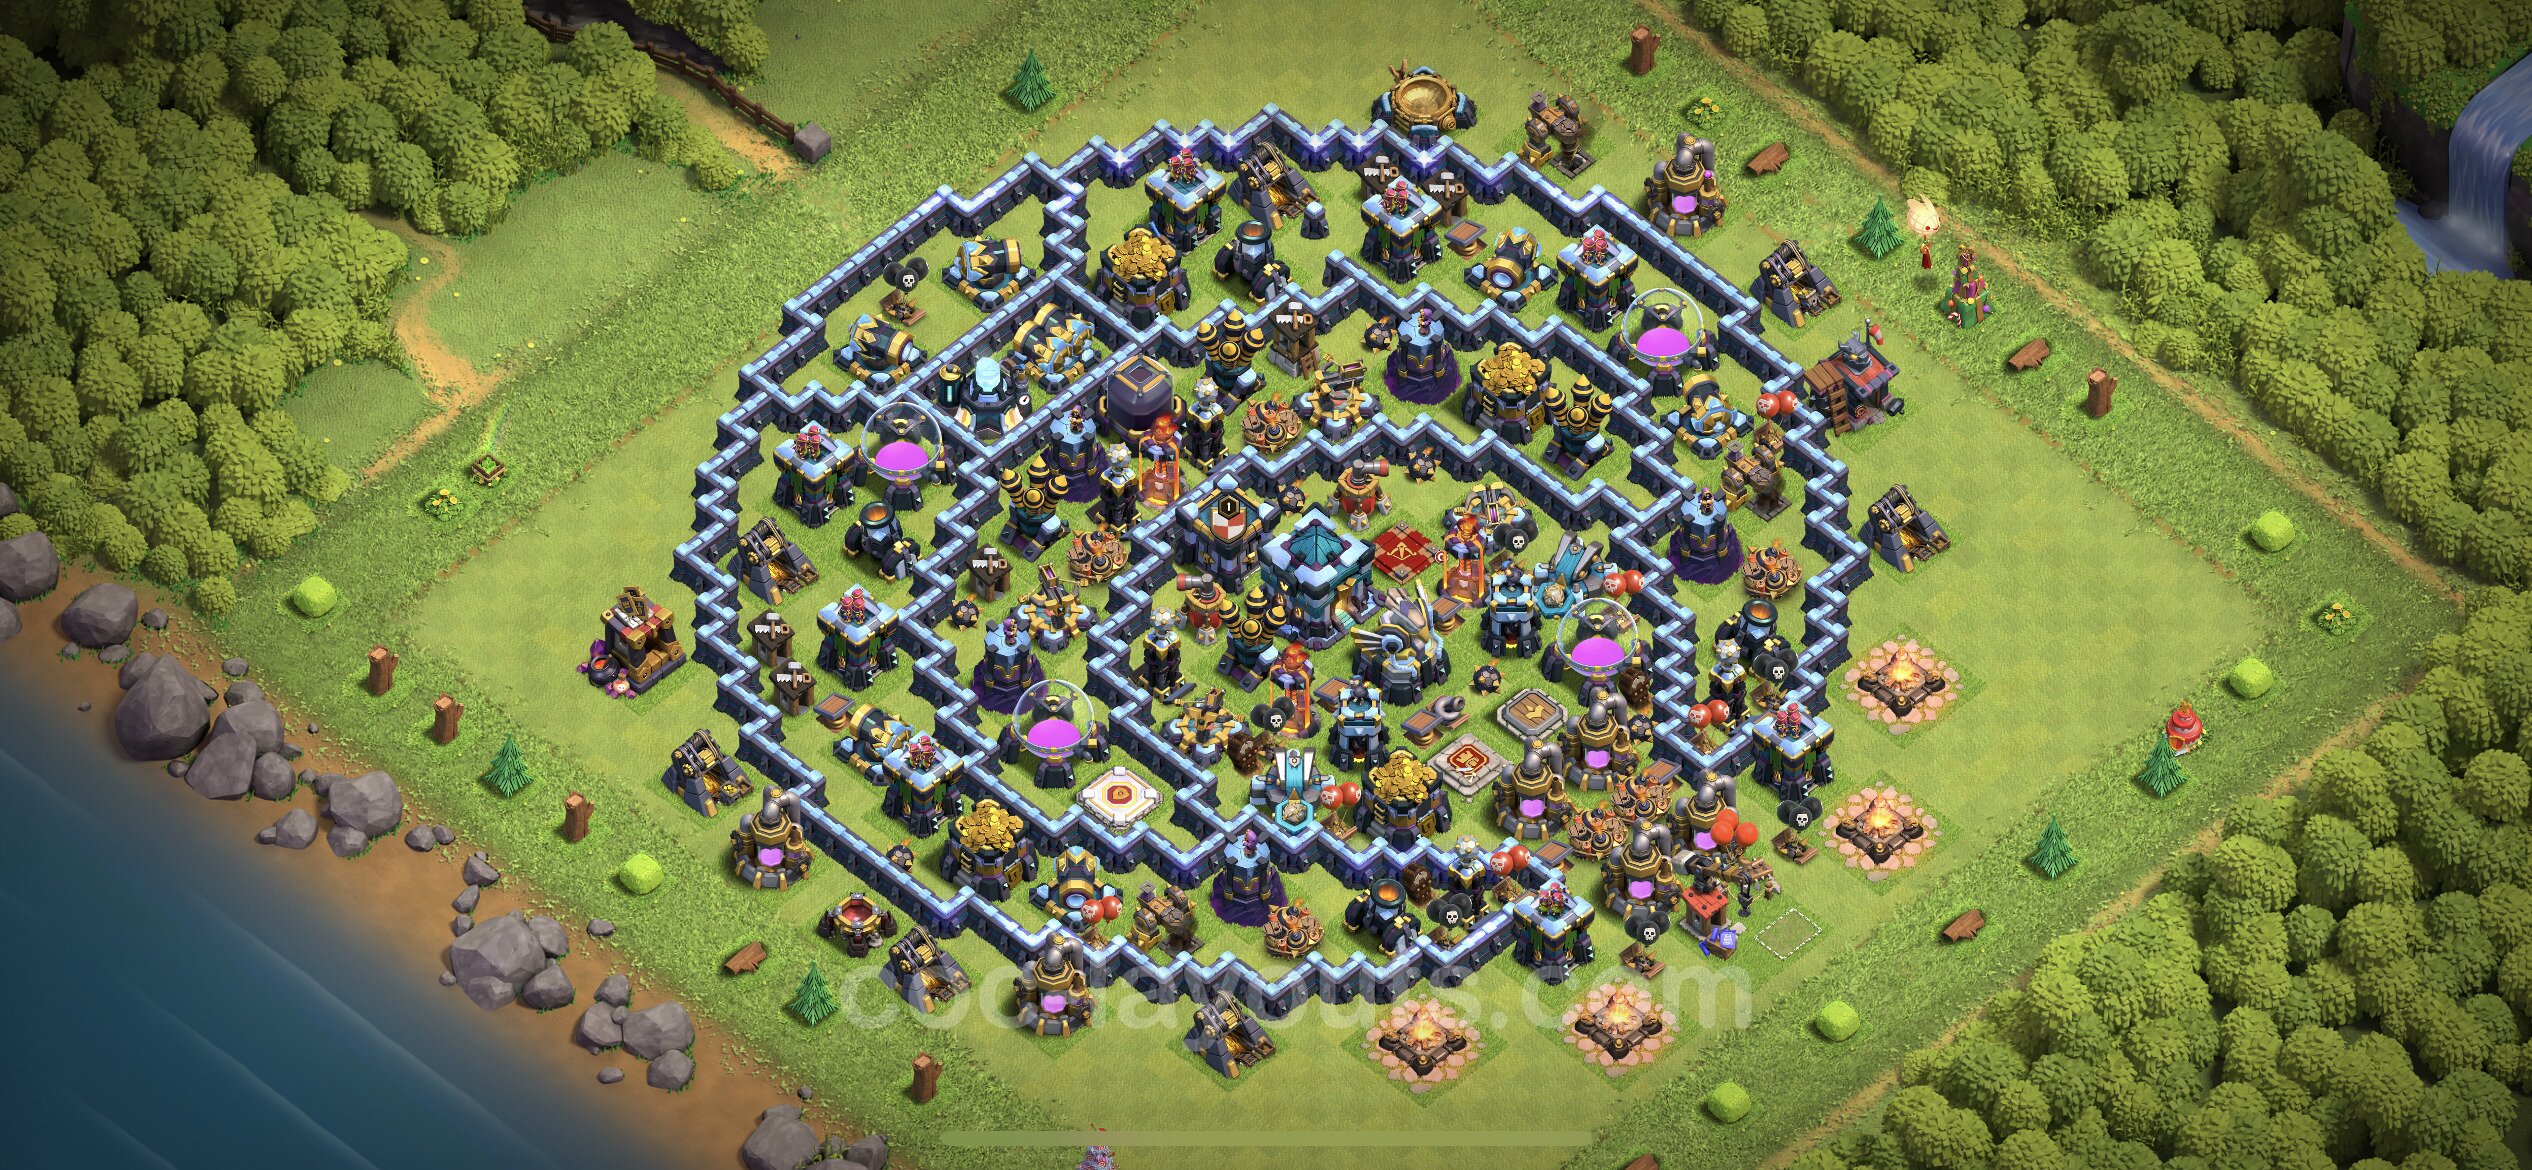 Farming Base TH13 with Link, Hybrid - plan / layout / design - Clash of Cla...